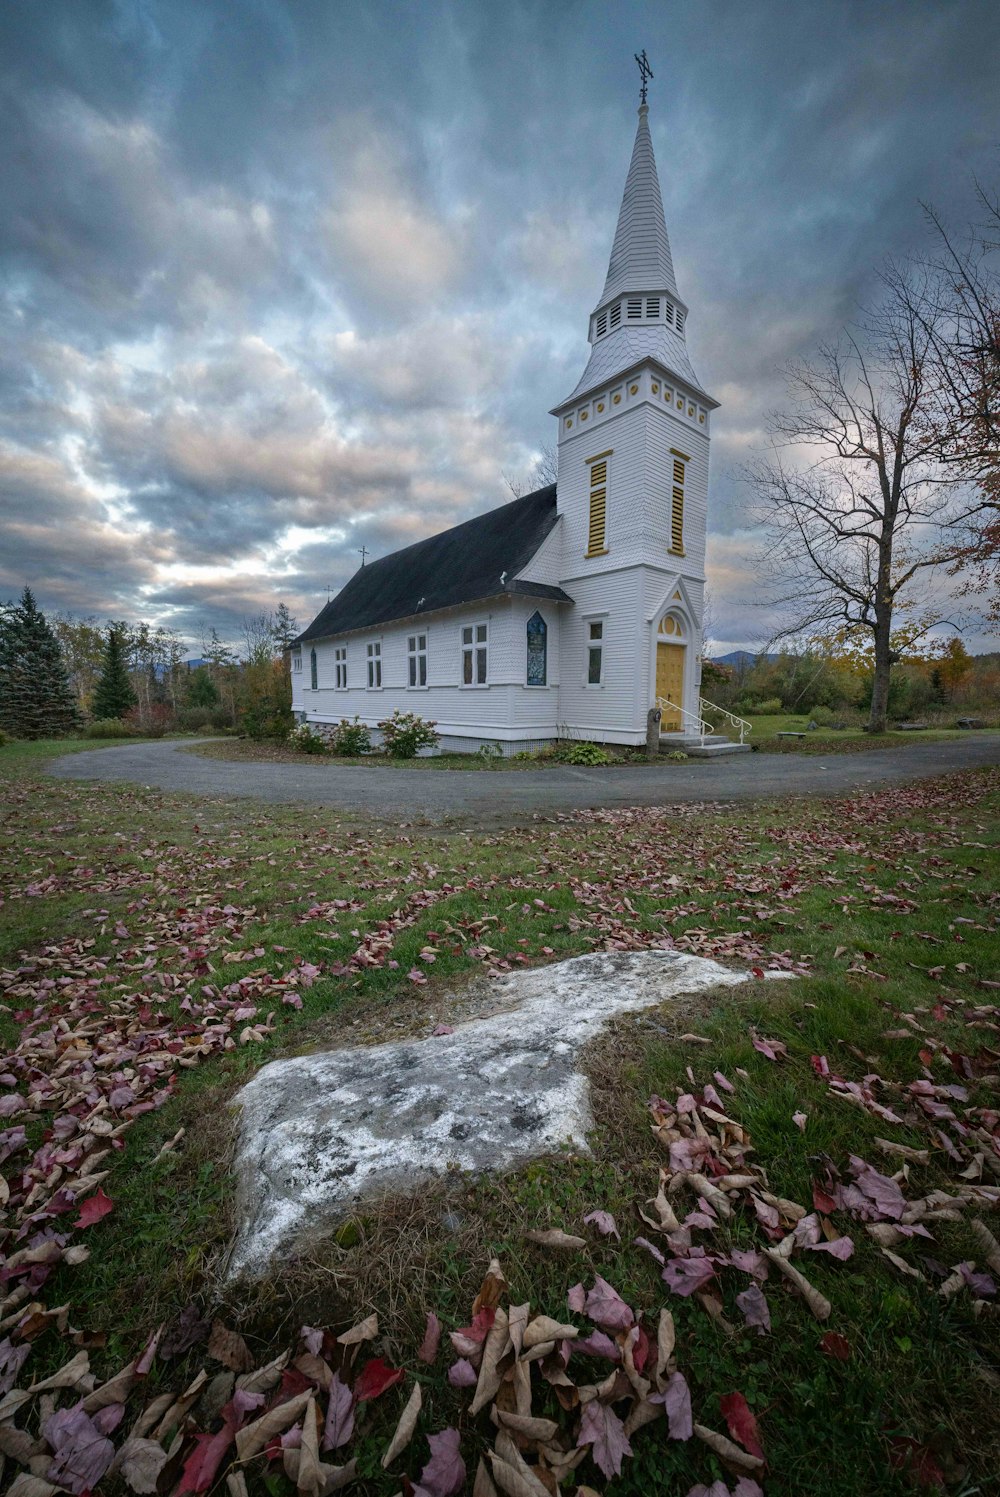 a white church with a steeple surrounded by fallen leaves